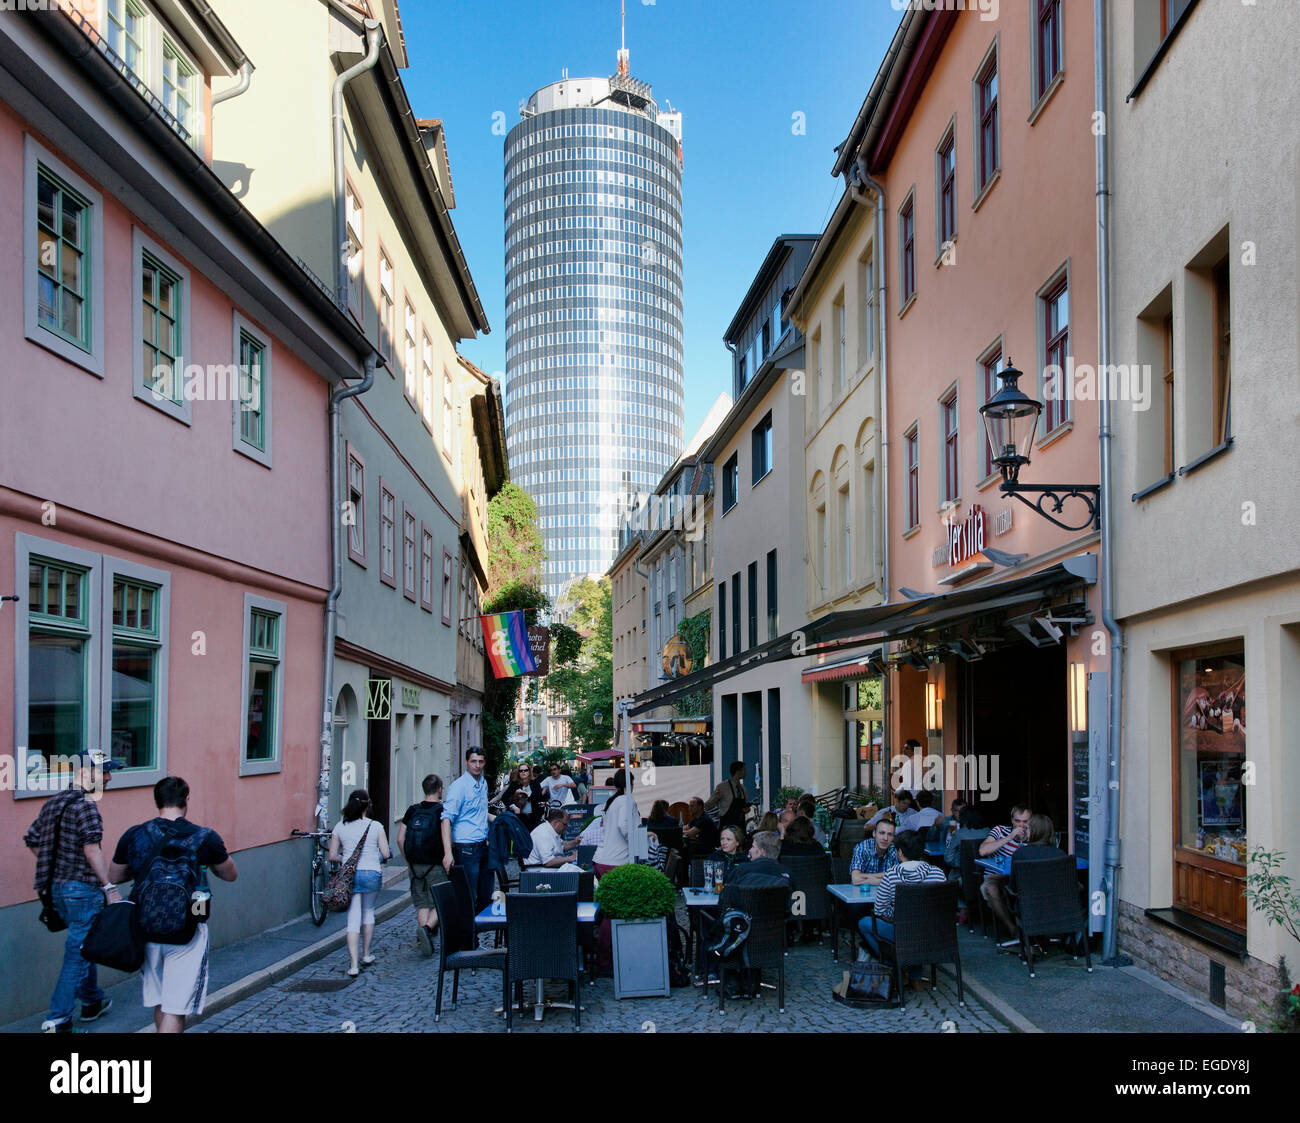 Cafe in the Wagnergasse, Jentower in the background, Jena, Thuringia, Germany Stock Photo